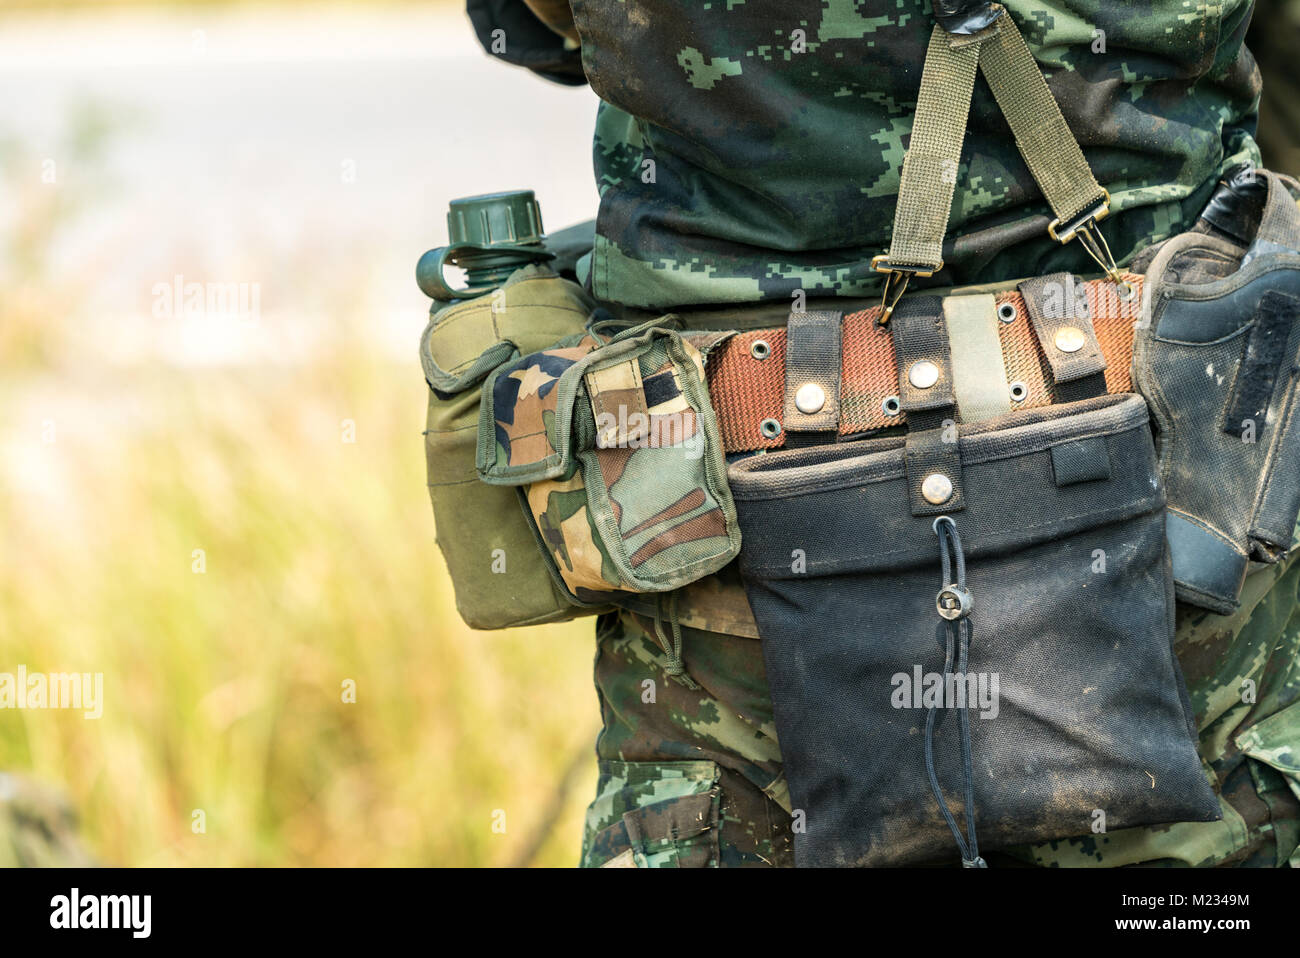 Soilder preparation ready for war and combat and eaiting command. Stock Photo